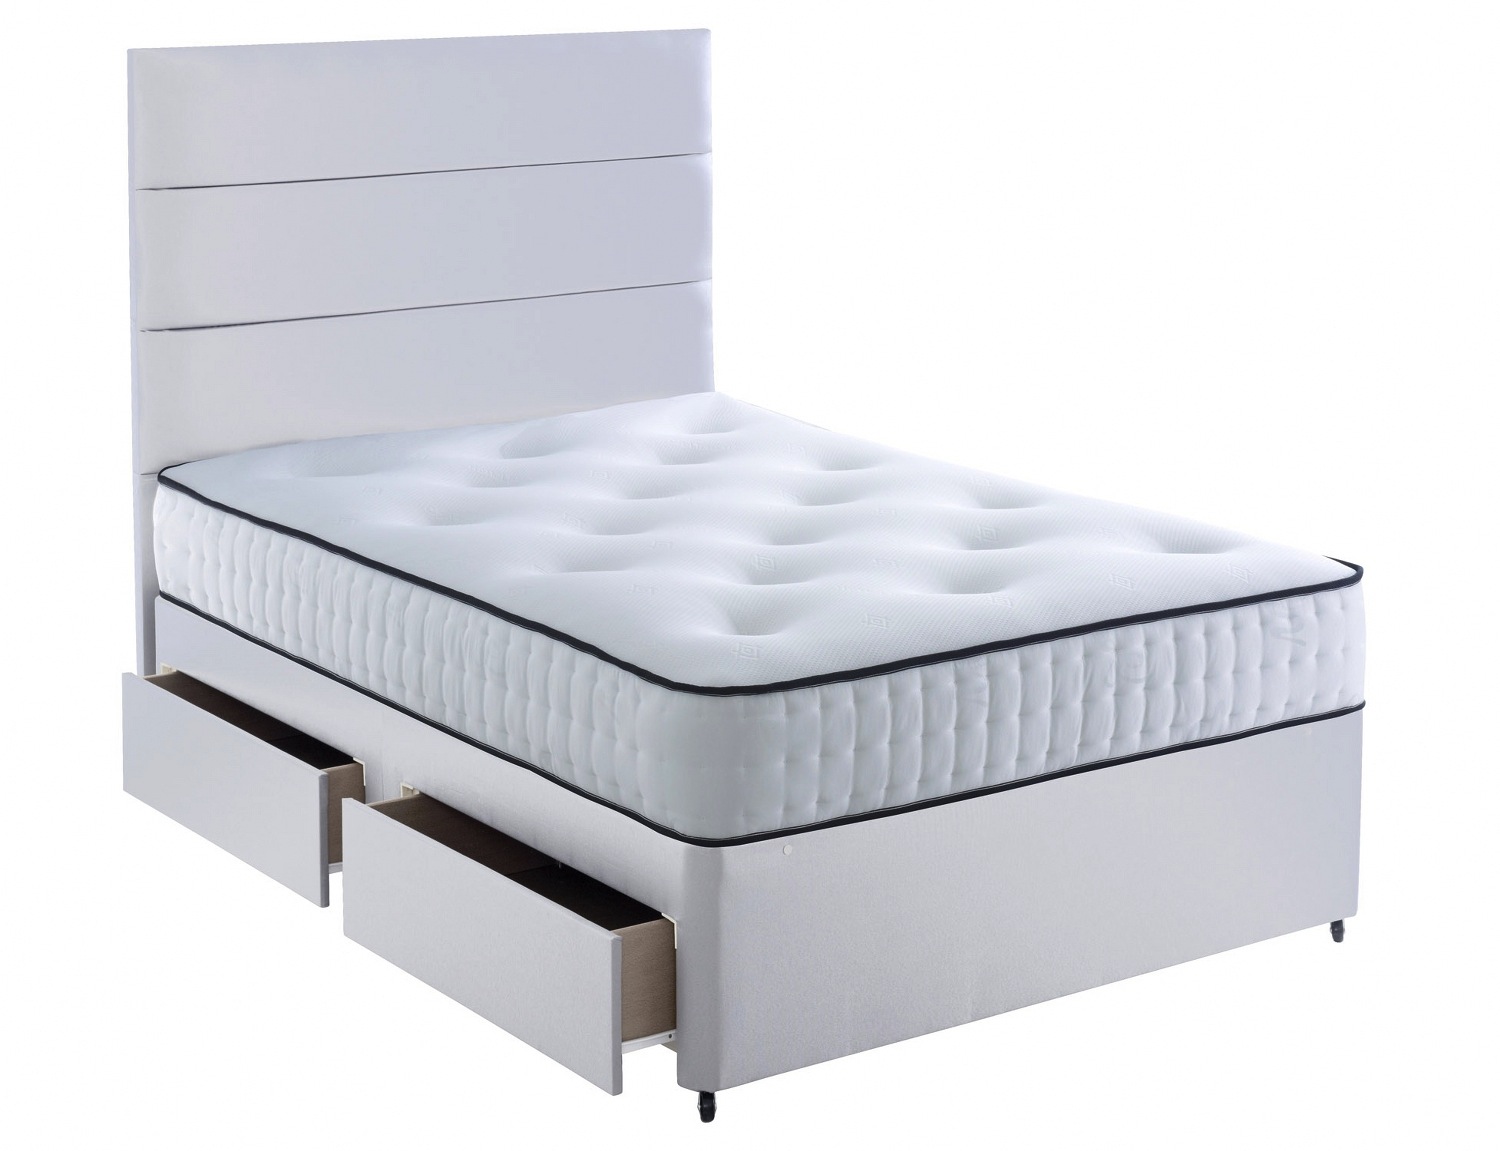 Luxury Pocket Spring Series 1500 Memory Foam Divan Bed-Small Double-2 Drawers Same Side